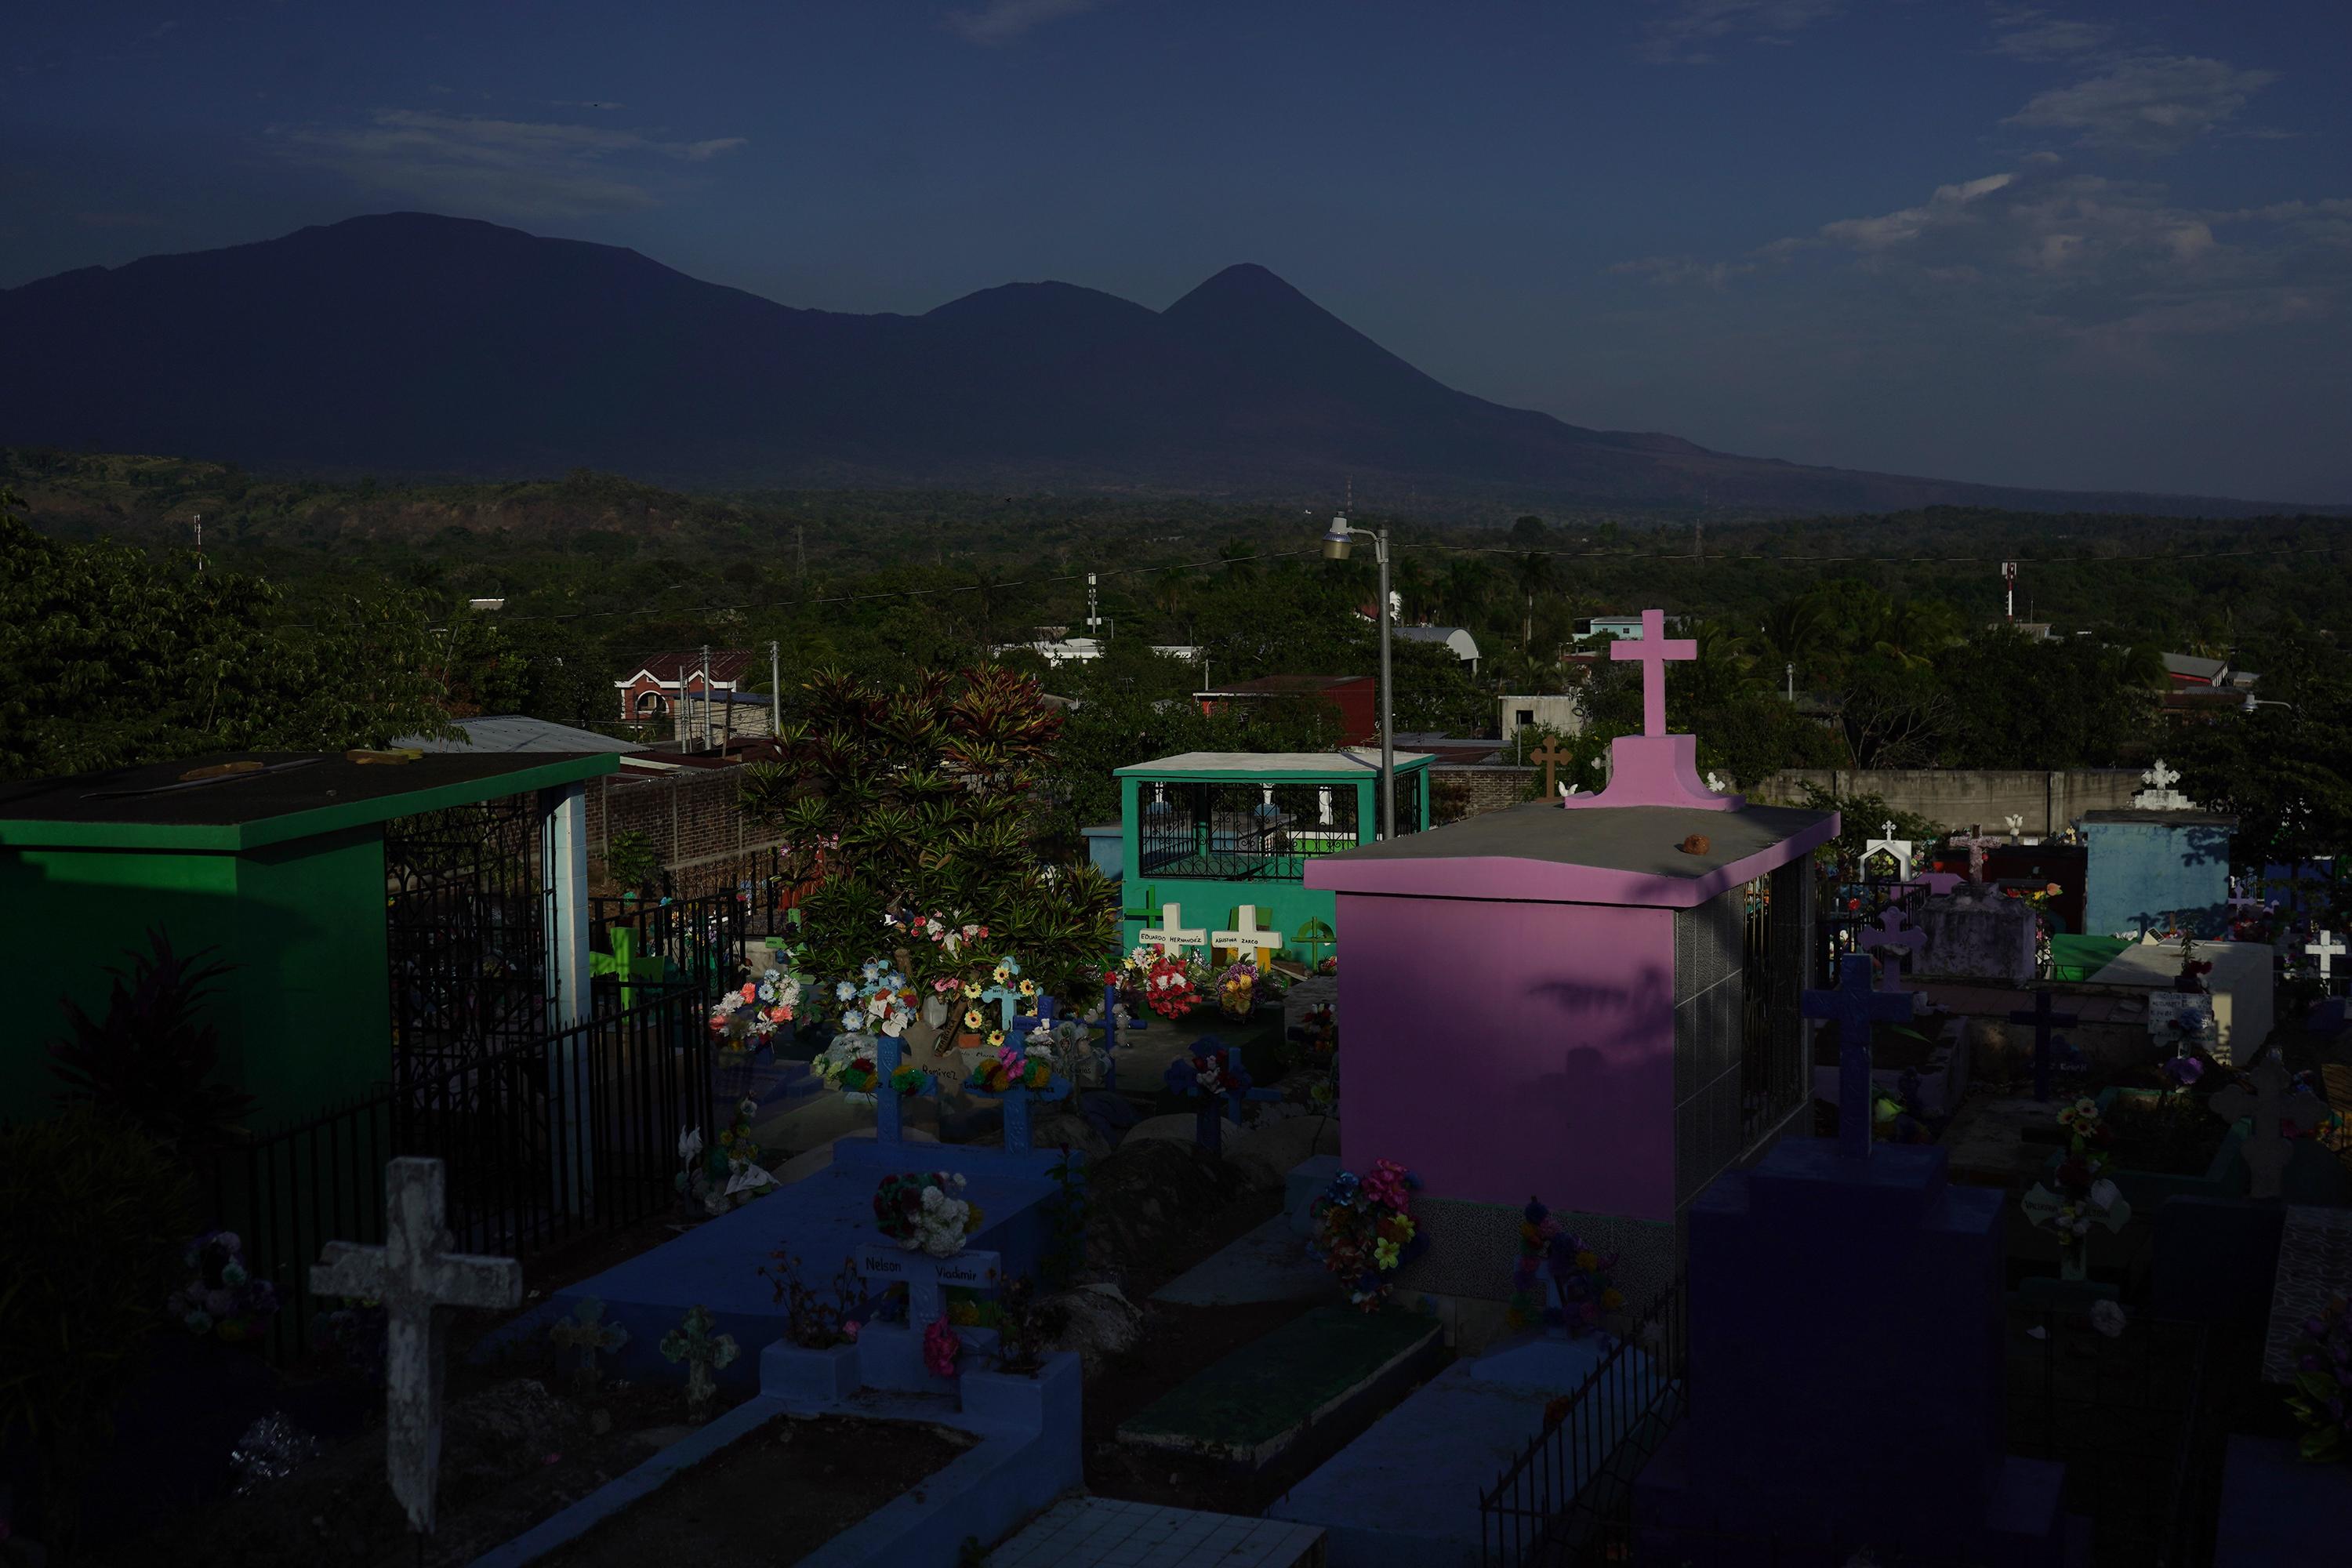 On March 11, 2015, members of MS-13 opened fire on a funeral service in Nahuizalco, Sonsonate. They injured six people, including two children. The attendees lived in an area controlled by 18th Street. Photo: Víctor Peña/El Faro